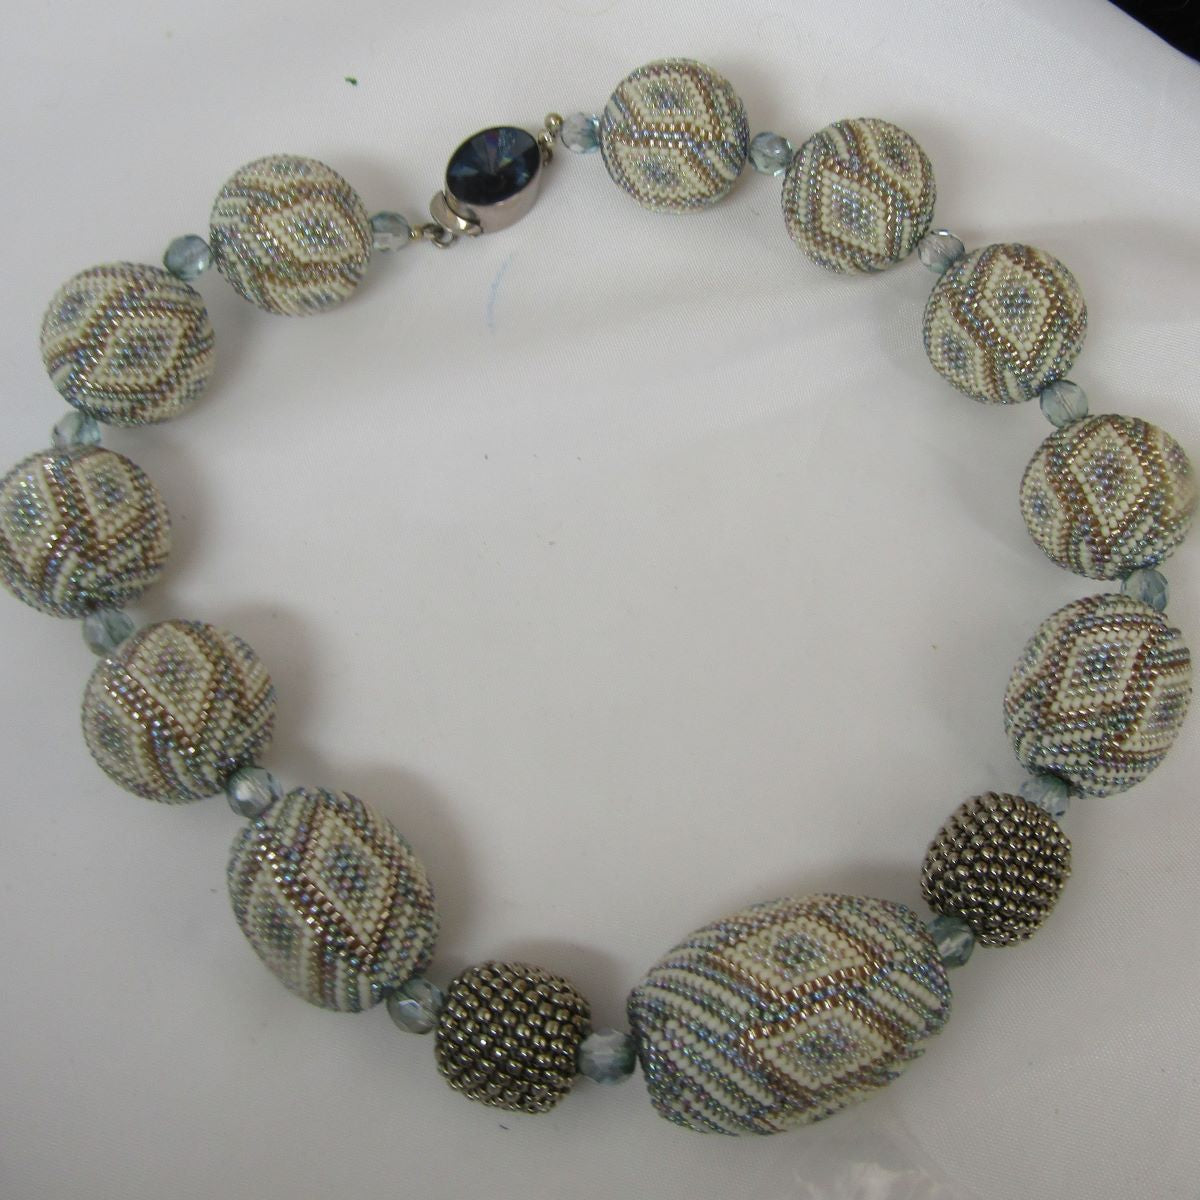 Exquisite Big Bold Chunky Bead Necklace in Cream Blue and Silver - VP's Jewelry